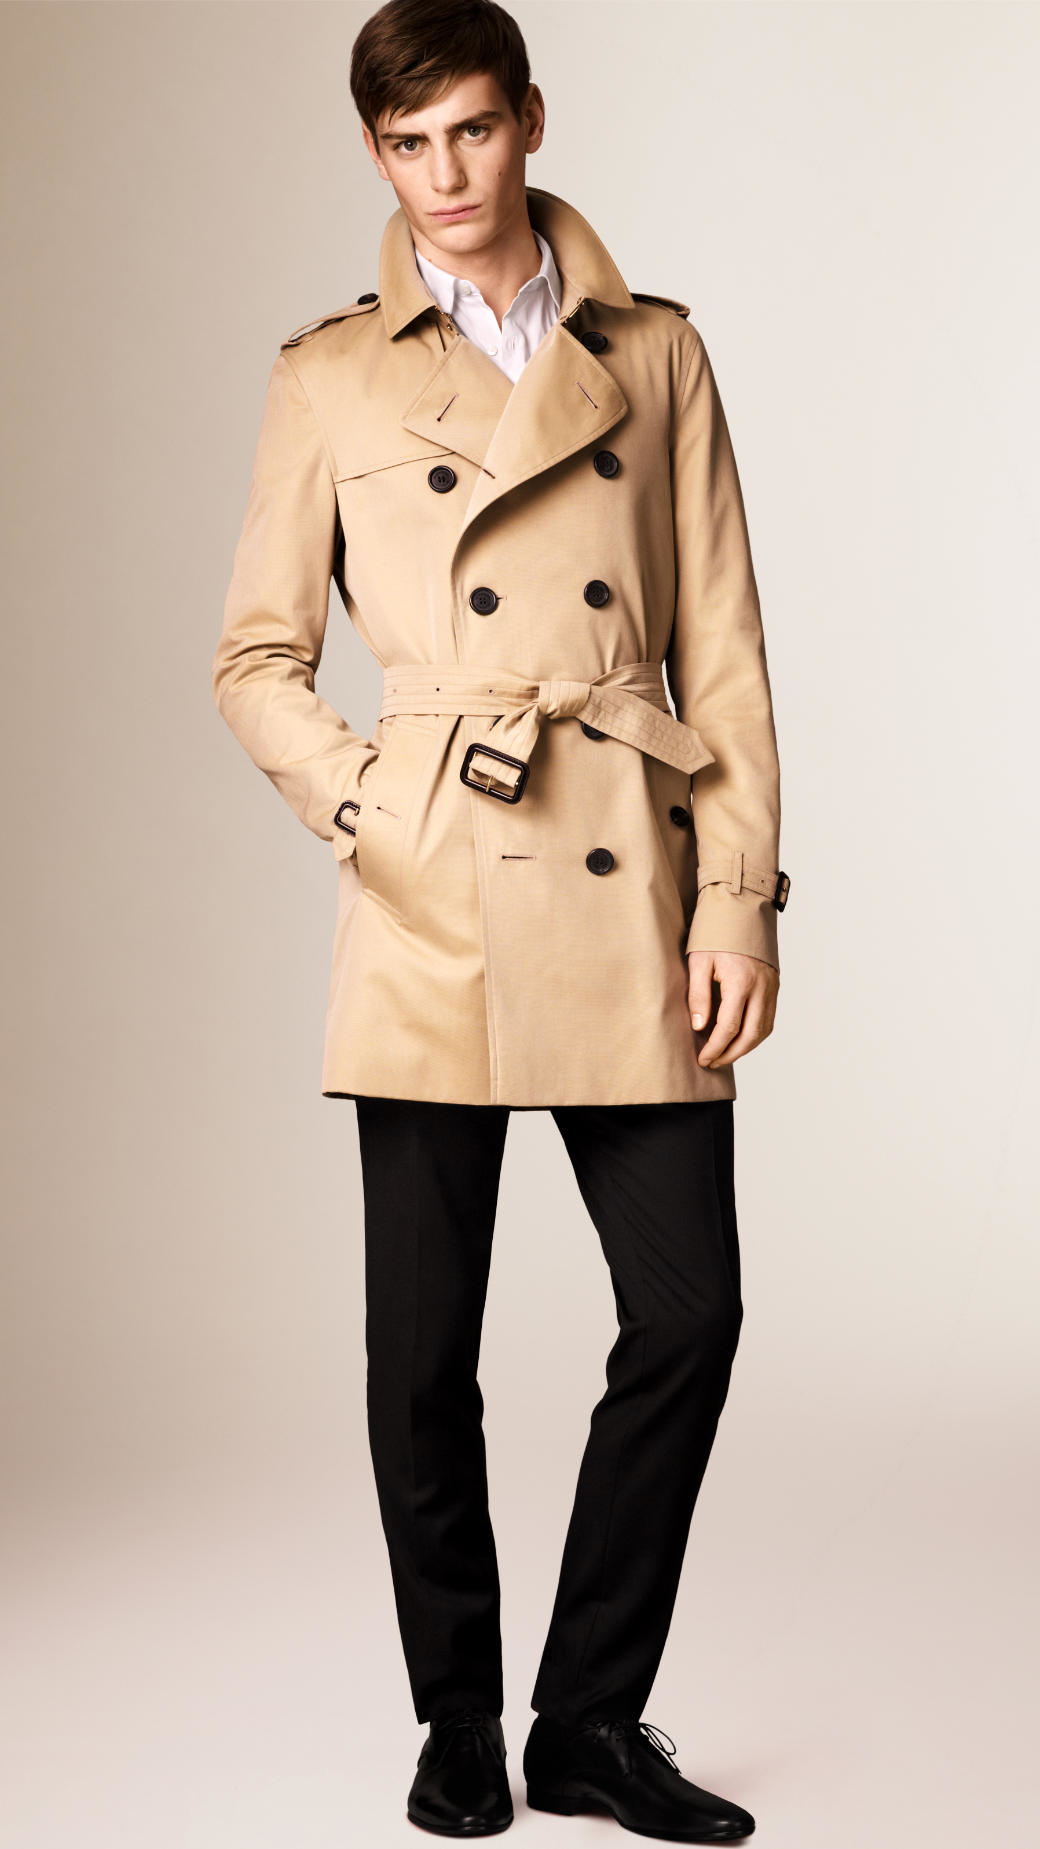 Lyst - Burberry The Kensington - Mid-length Heritage Trench Coat in ...